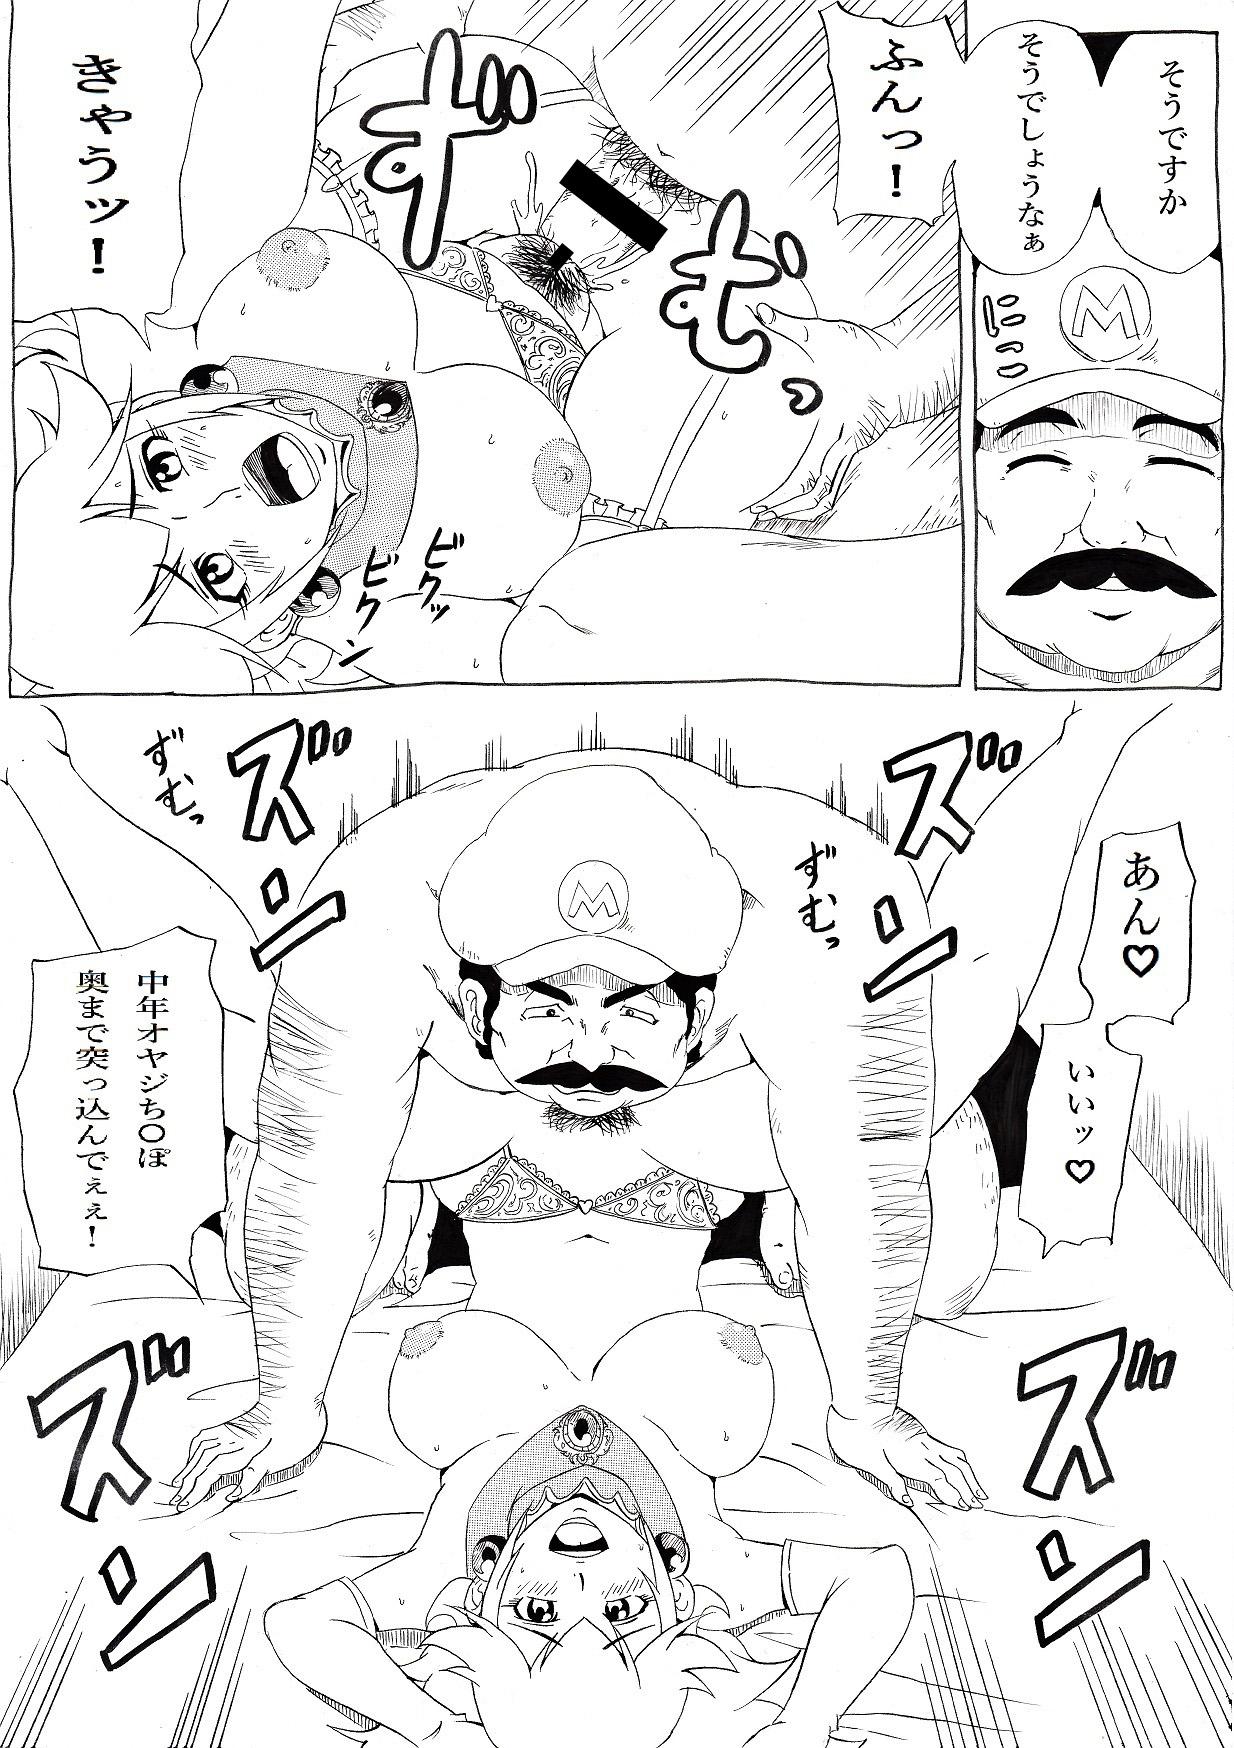 Phat Ass Momoman - Super mario brothers Threesome - Page 7